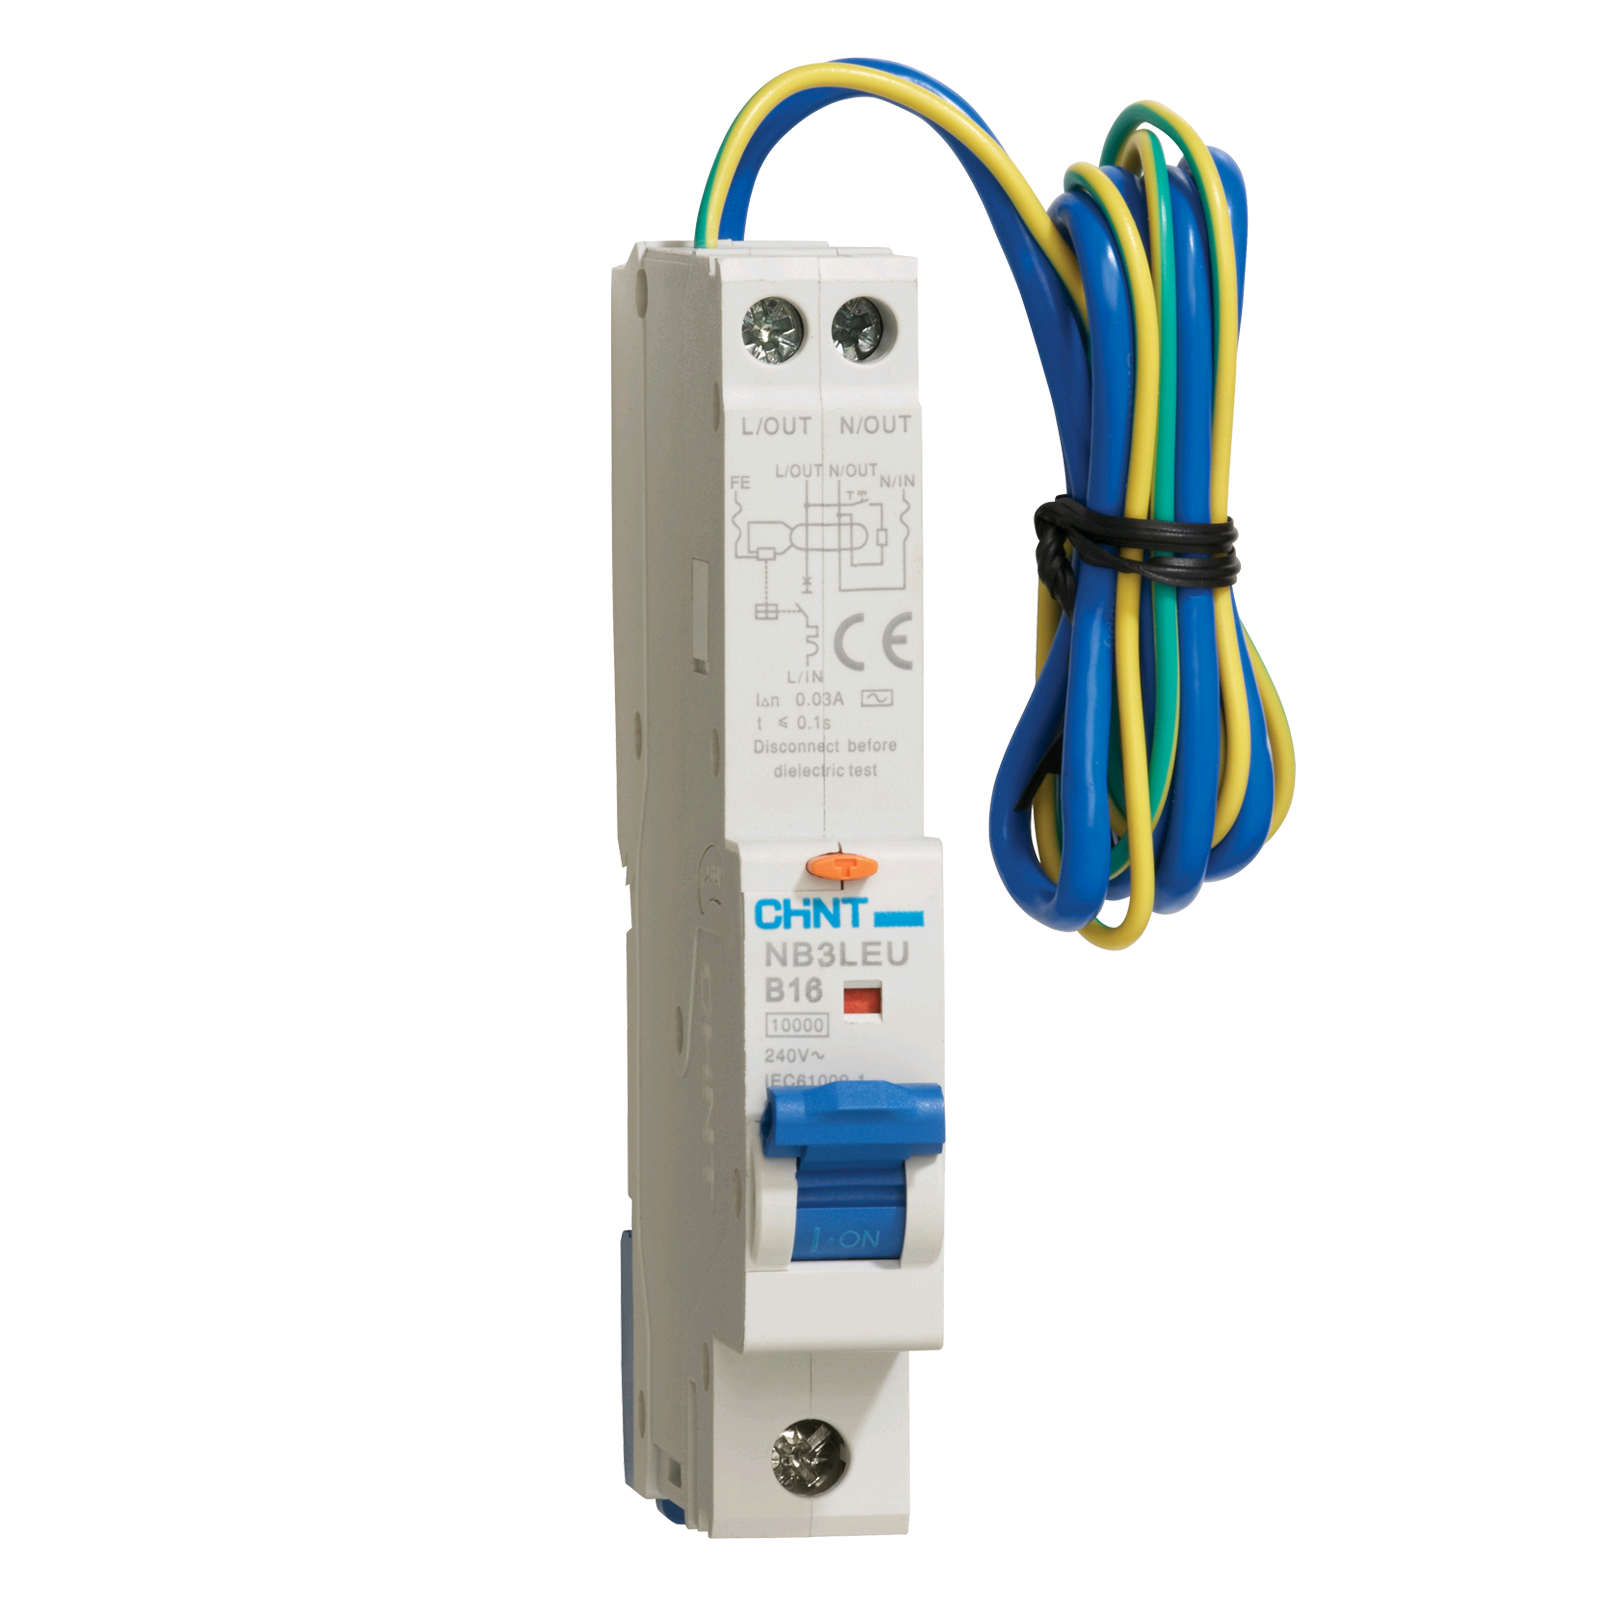 Chint 6a 30mA RCBO " B" Rated Type "A"